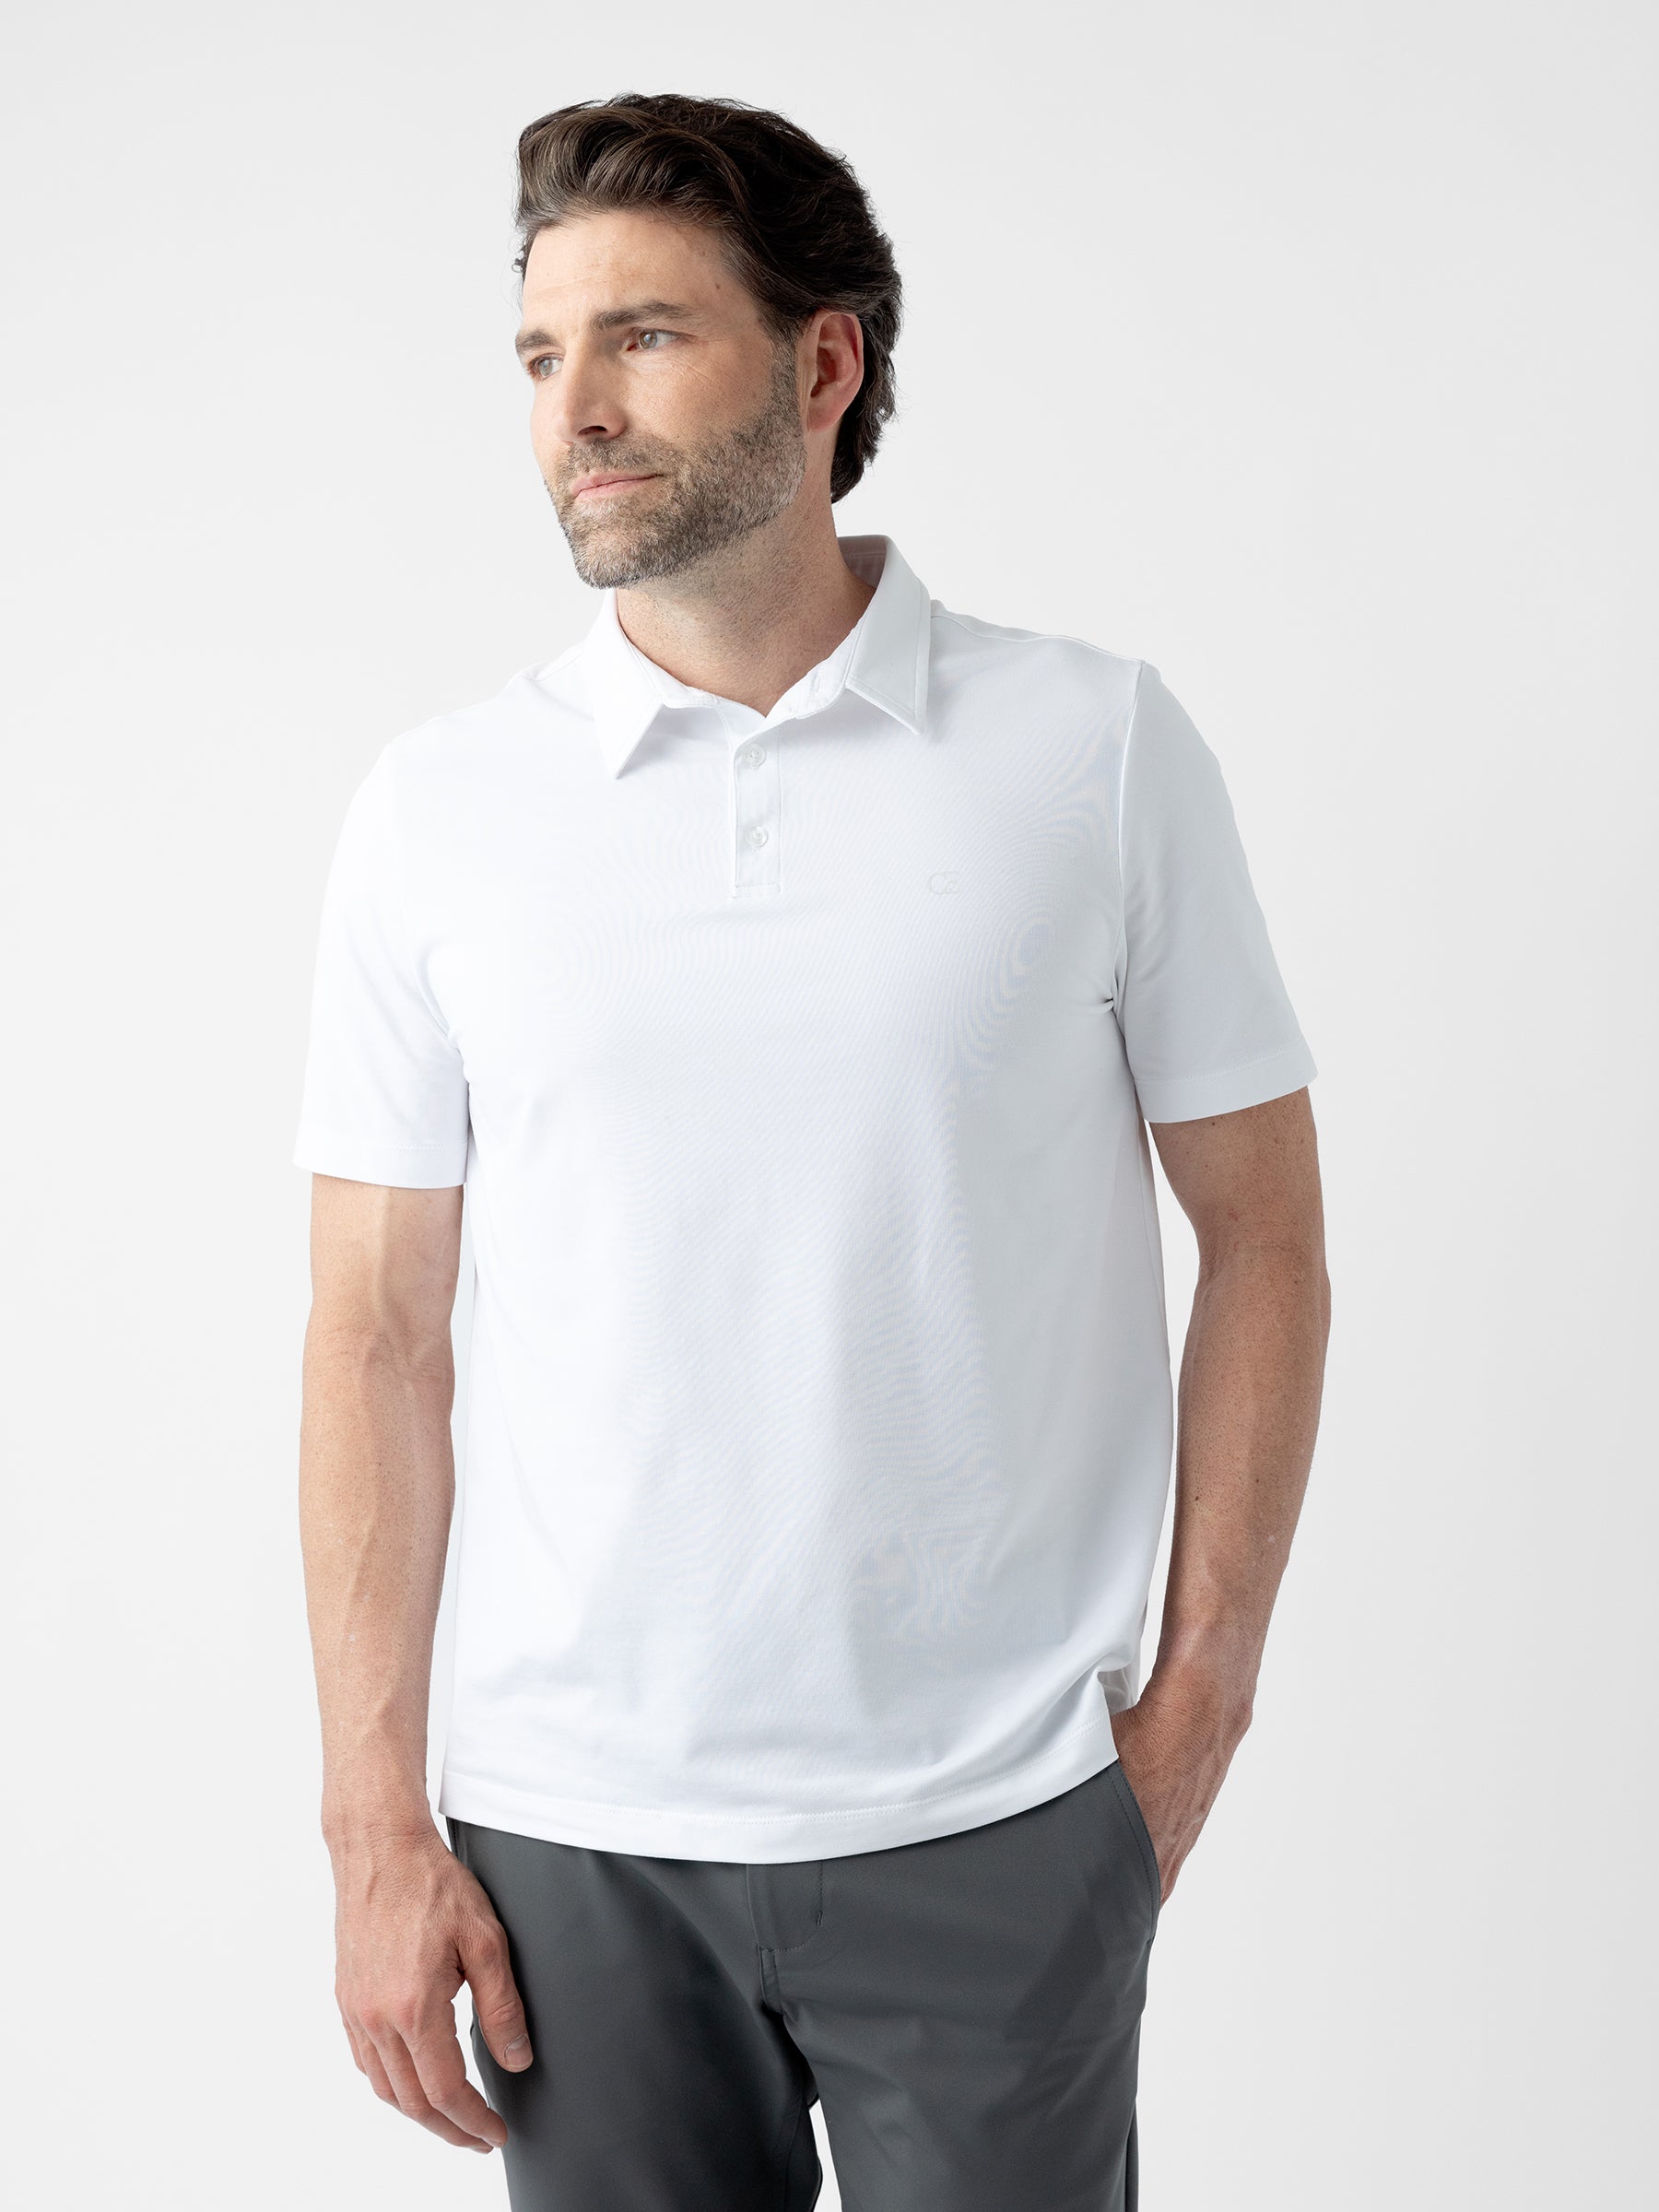 A man with short brown hair, a beard, and mustache is standing against a plain white background. He is wearing the Men's Everyday Polo from Cozy Earth in white and gray pants. One hand is in his pant pocket as he gazes to the side with a neutral expression. |Color:White